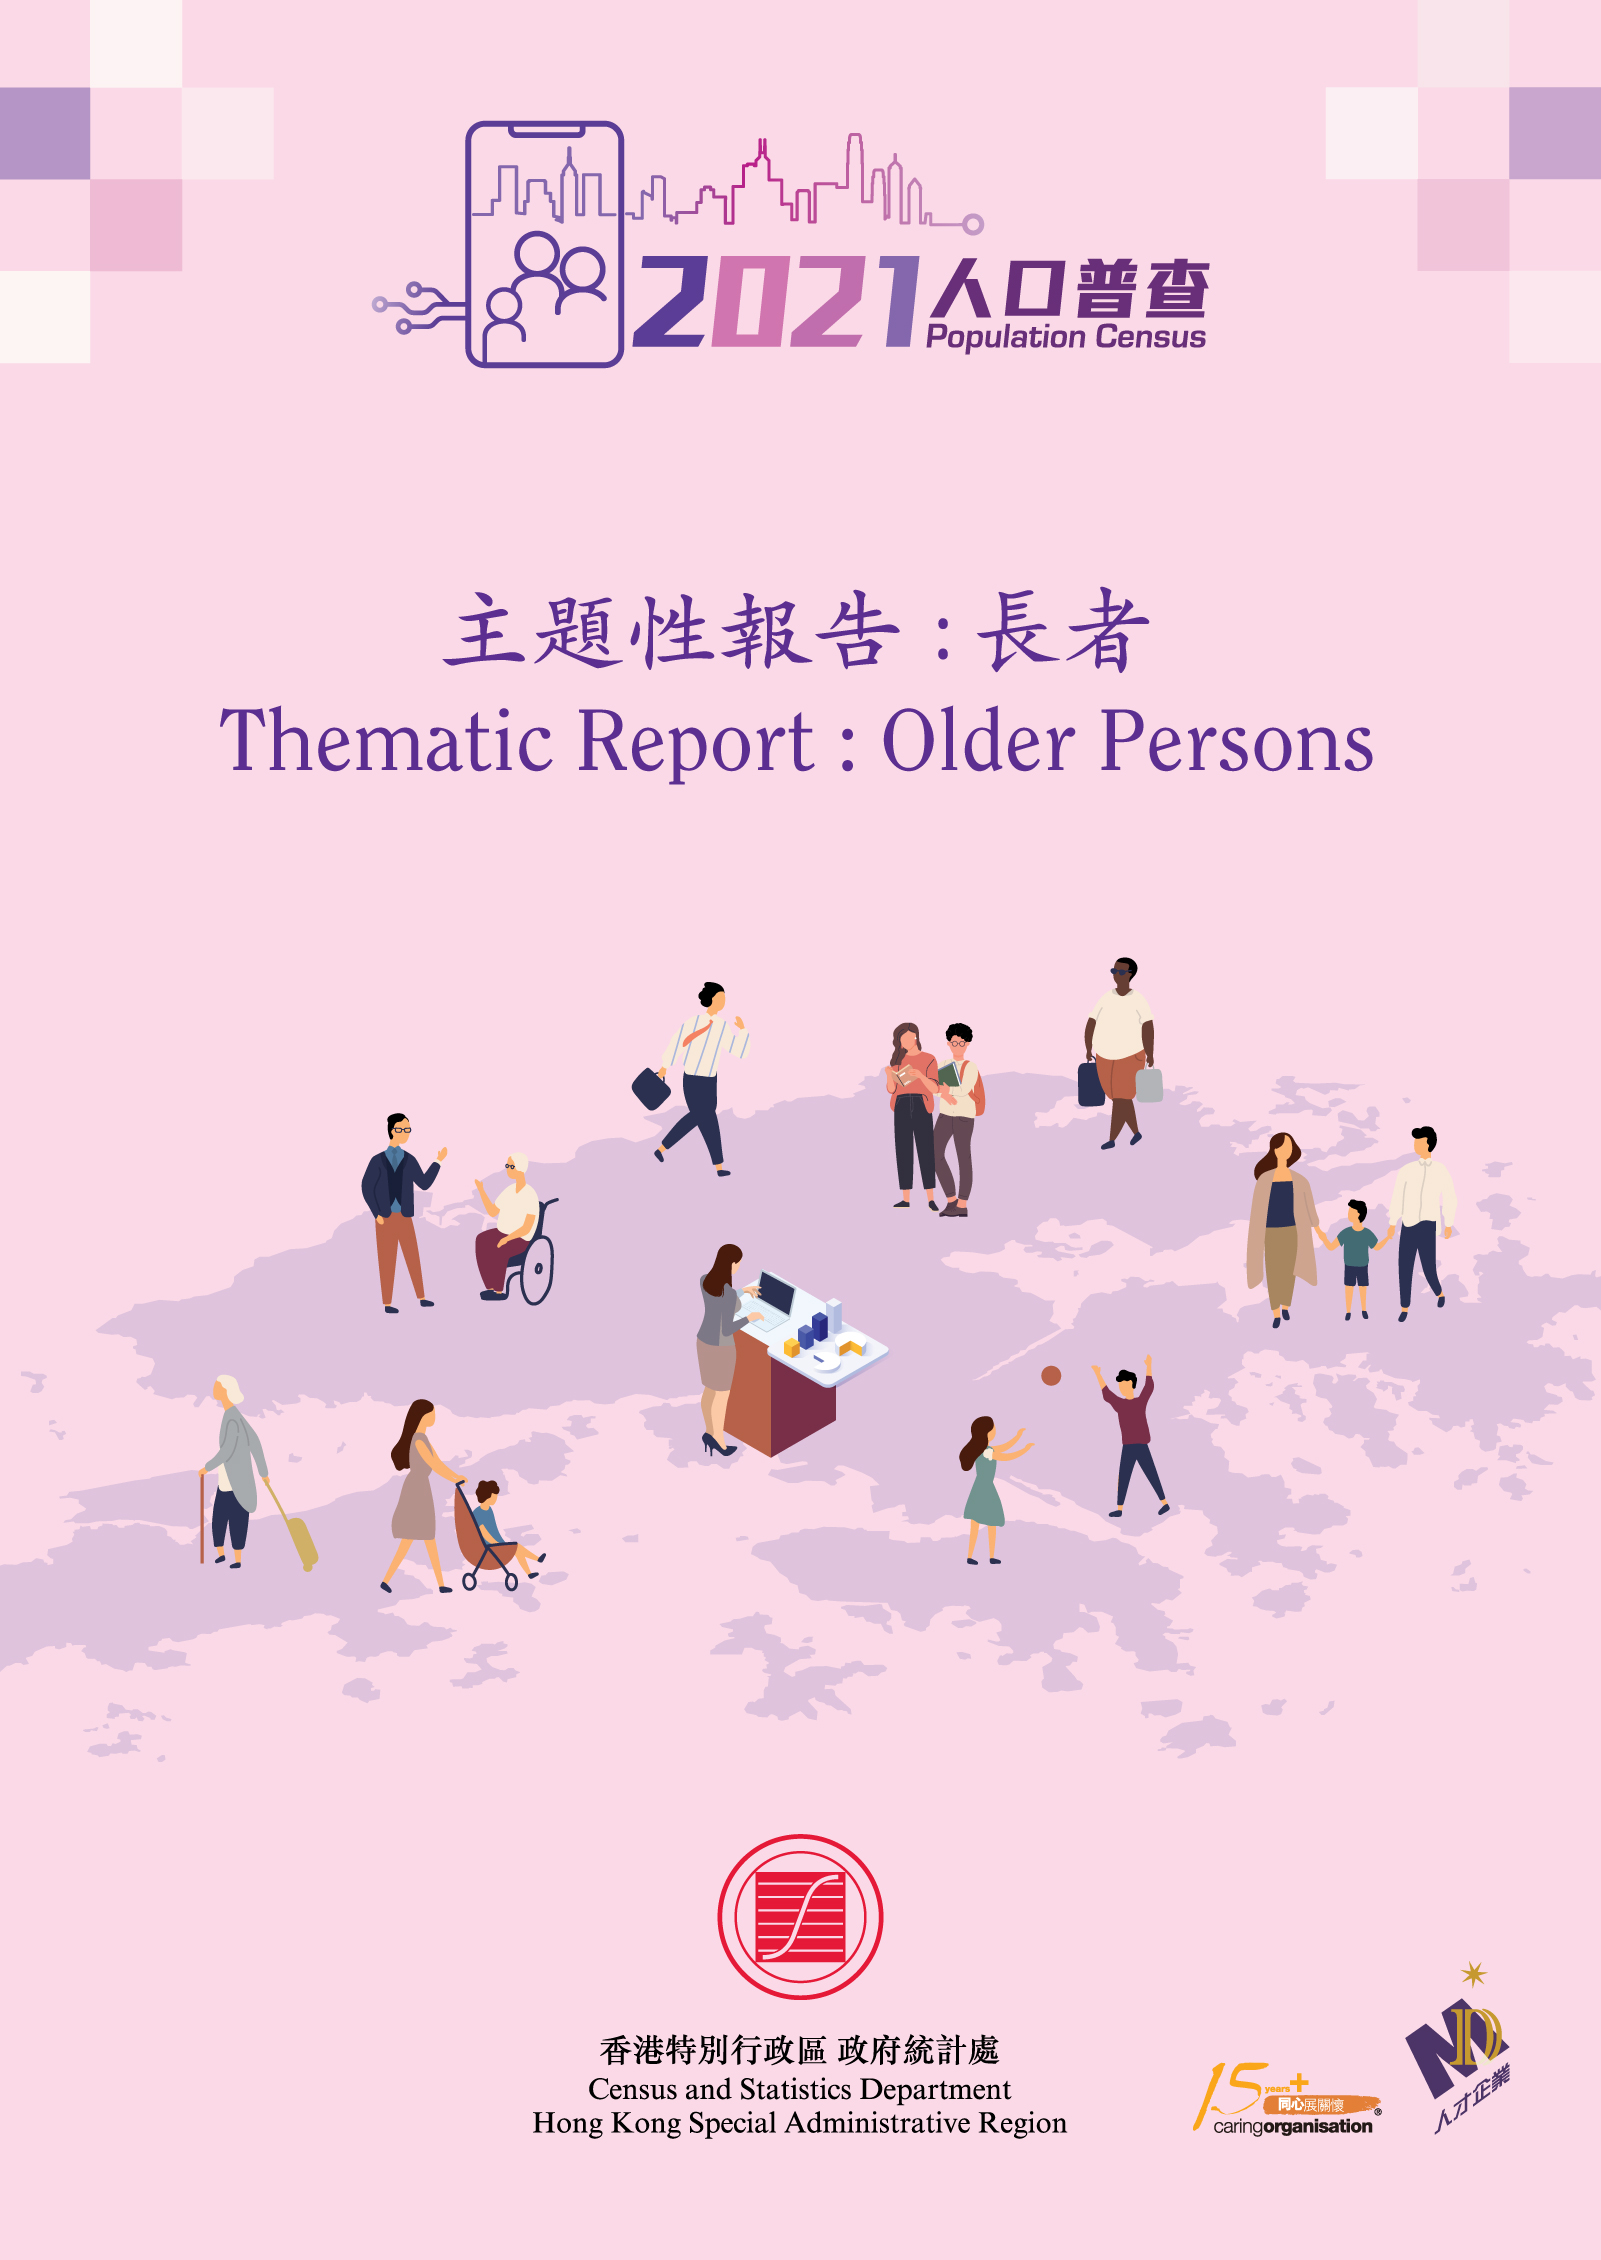 Thematic Report: Older Persons